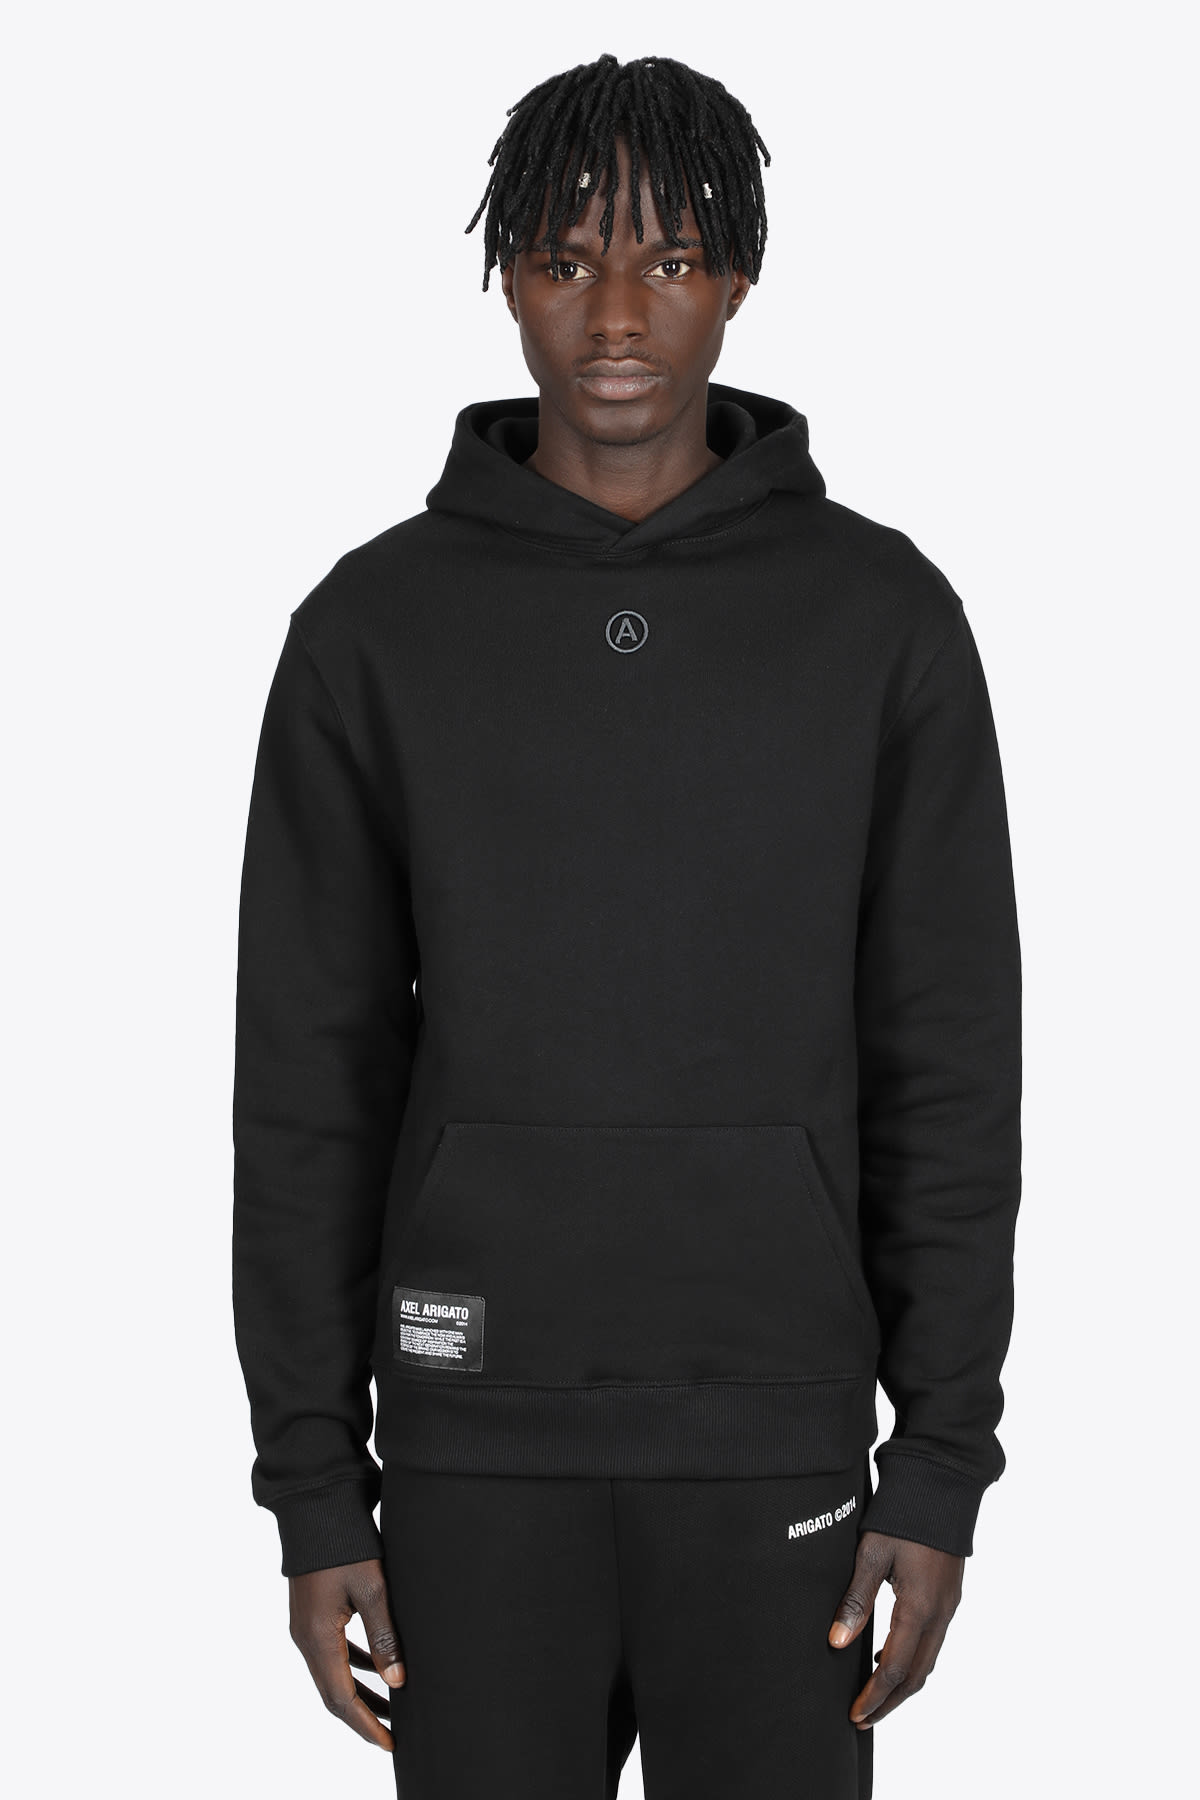 Axel Arigato A-sport Label Hoodie Black cotton hoodie with logo embroidery